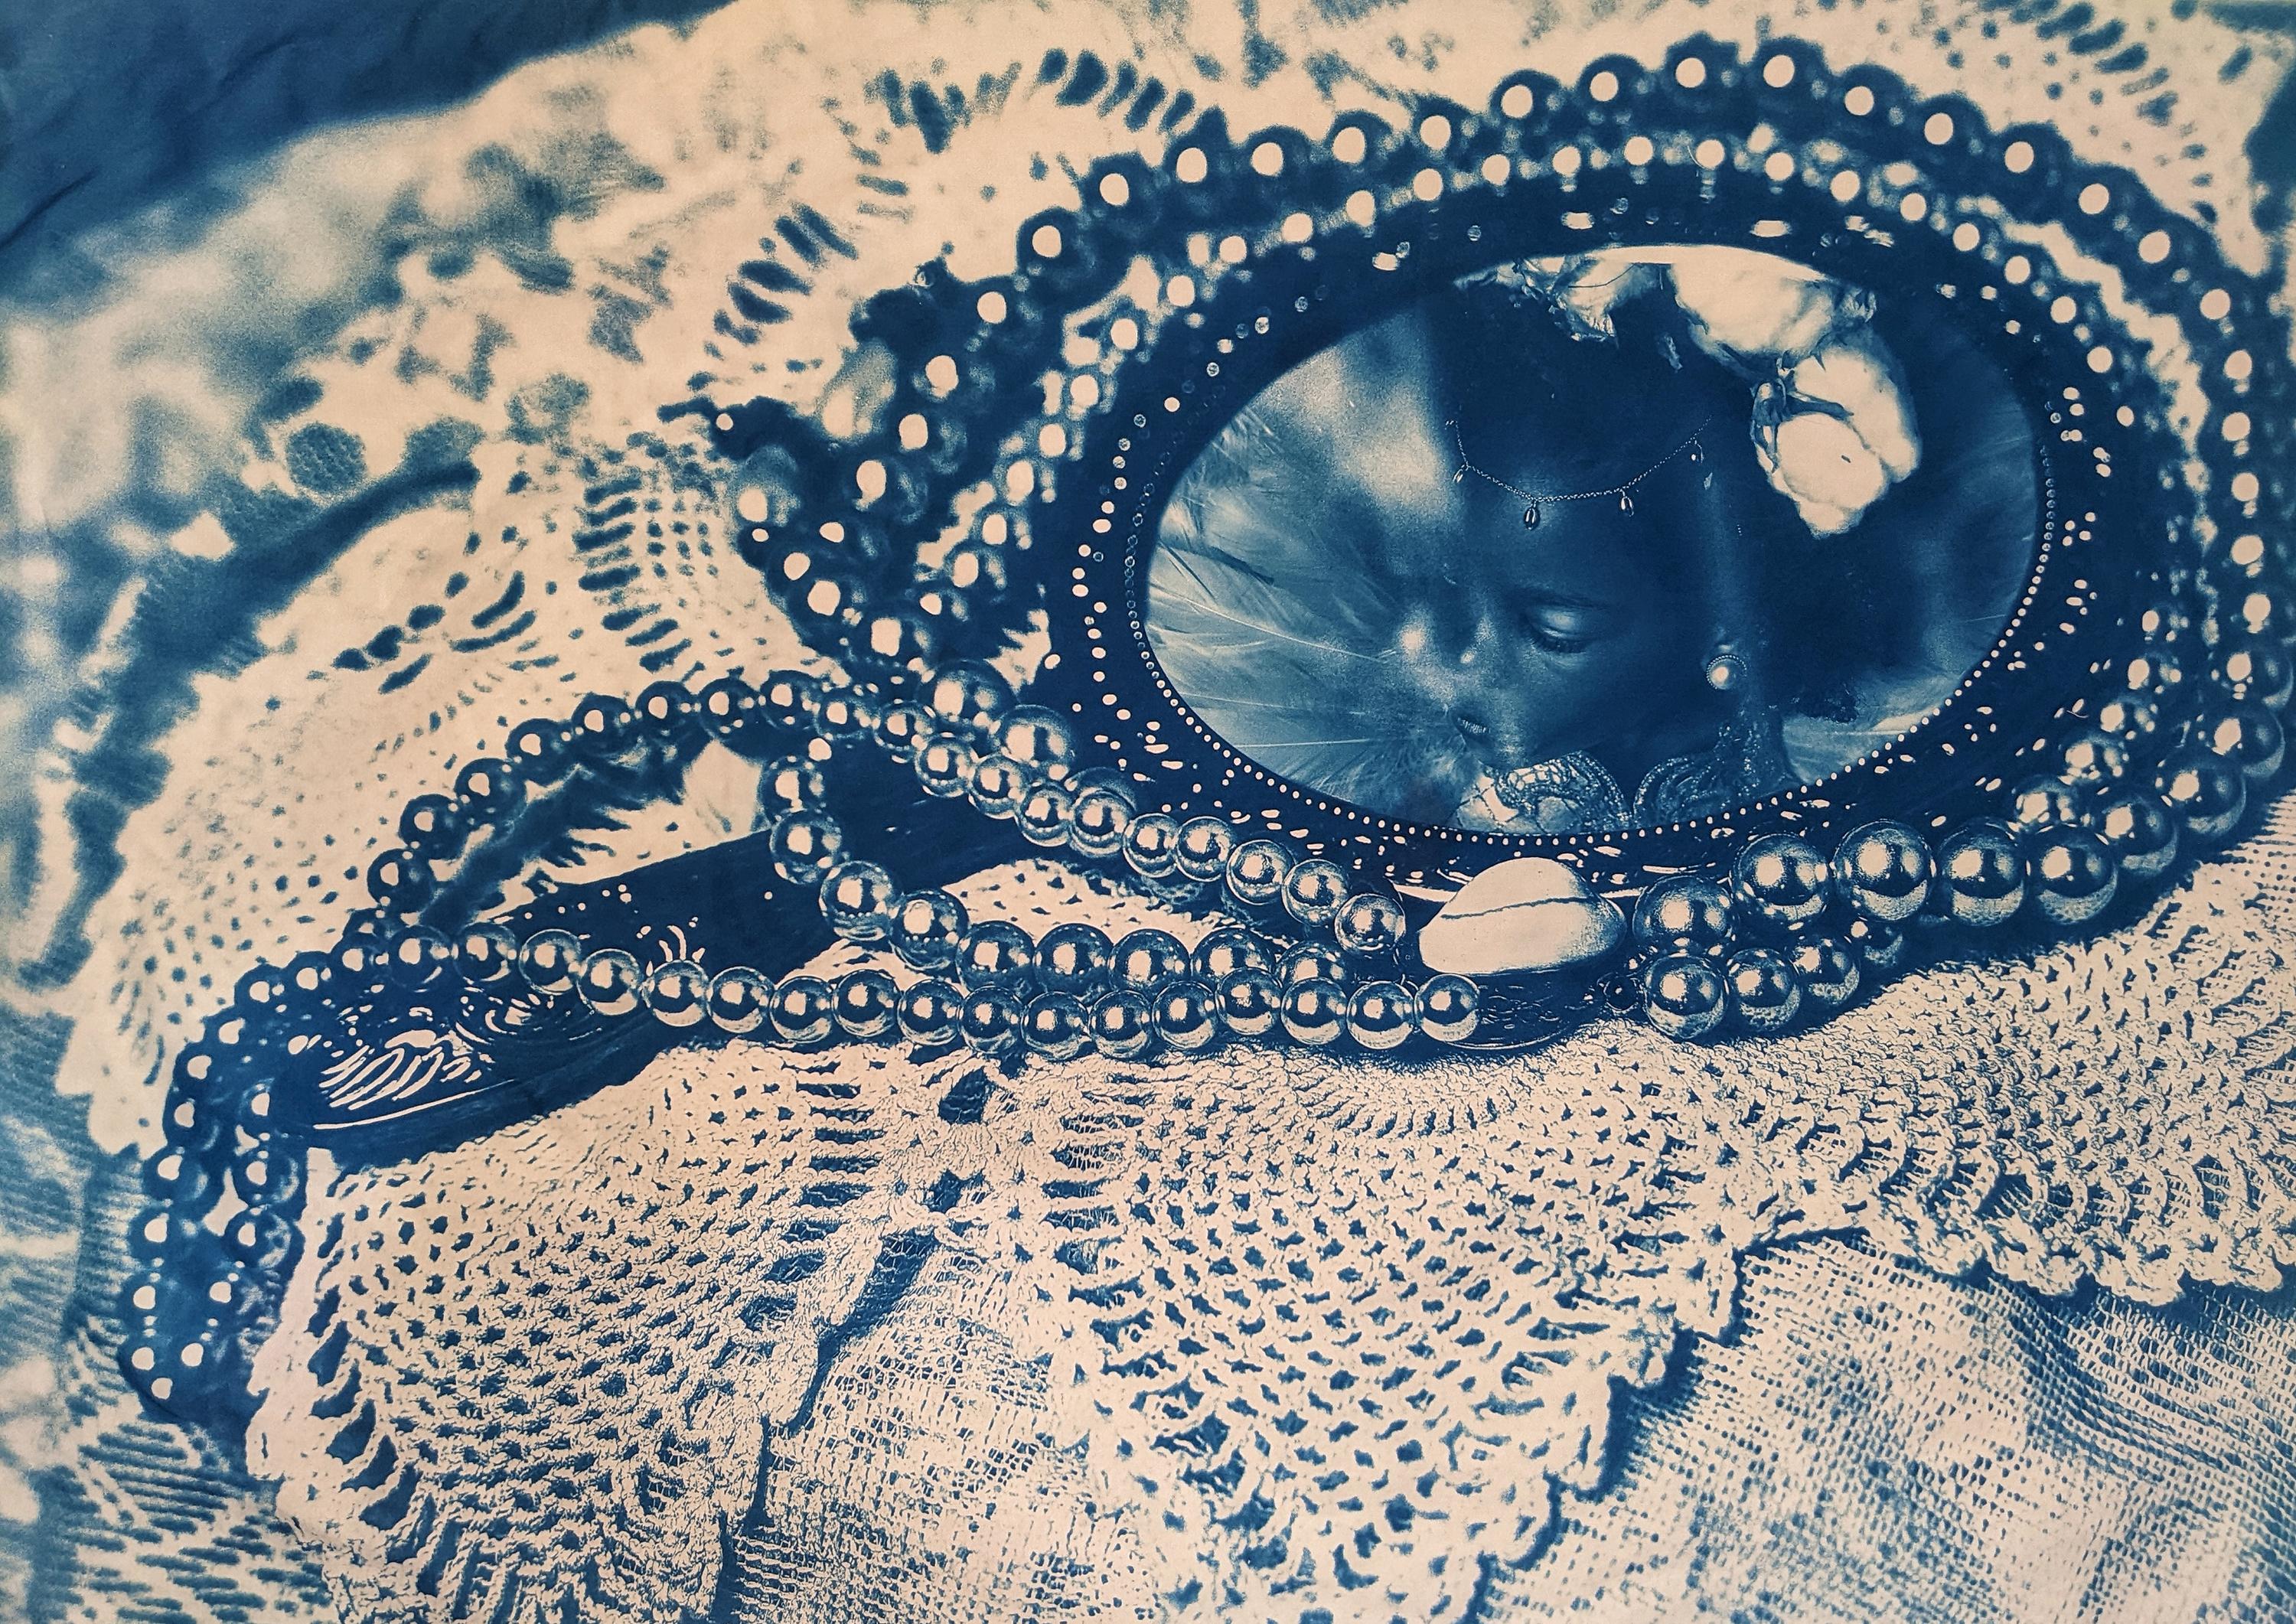 Tokie Rome-Taylor Color Photograph - "What Grandmother Bequeathed to Me" -  contemporary portrait - cyanotype